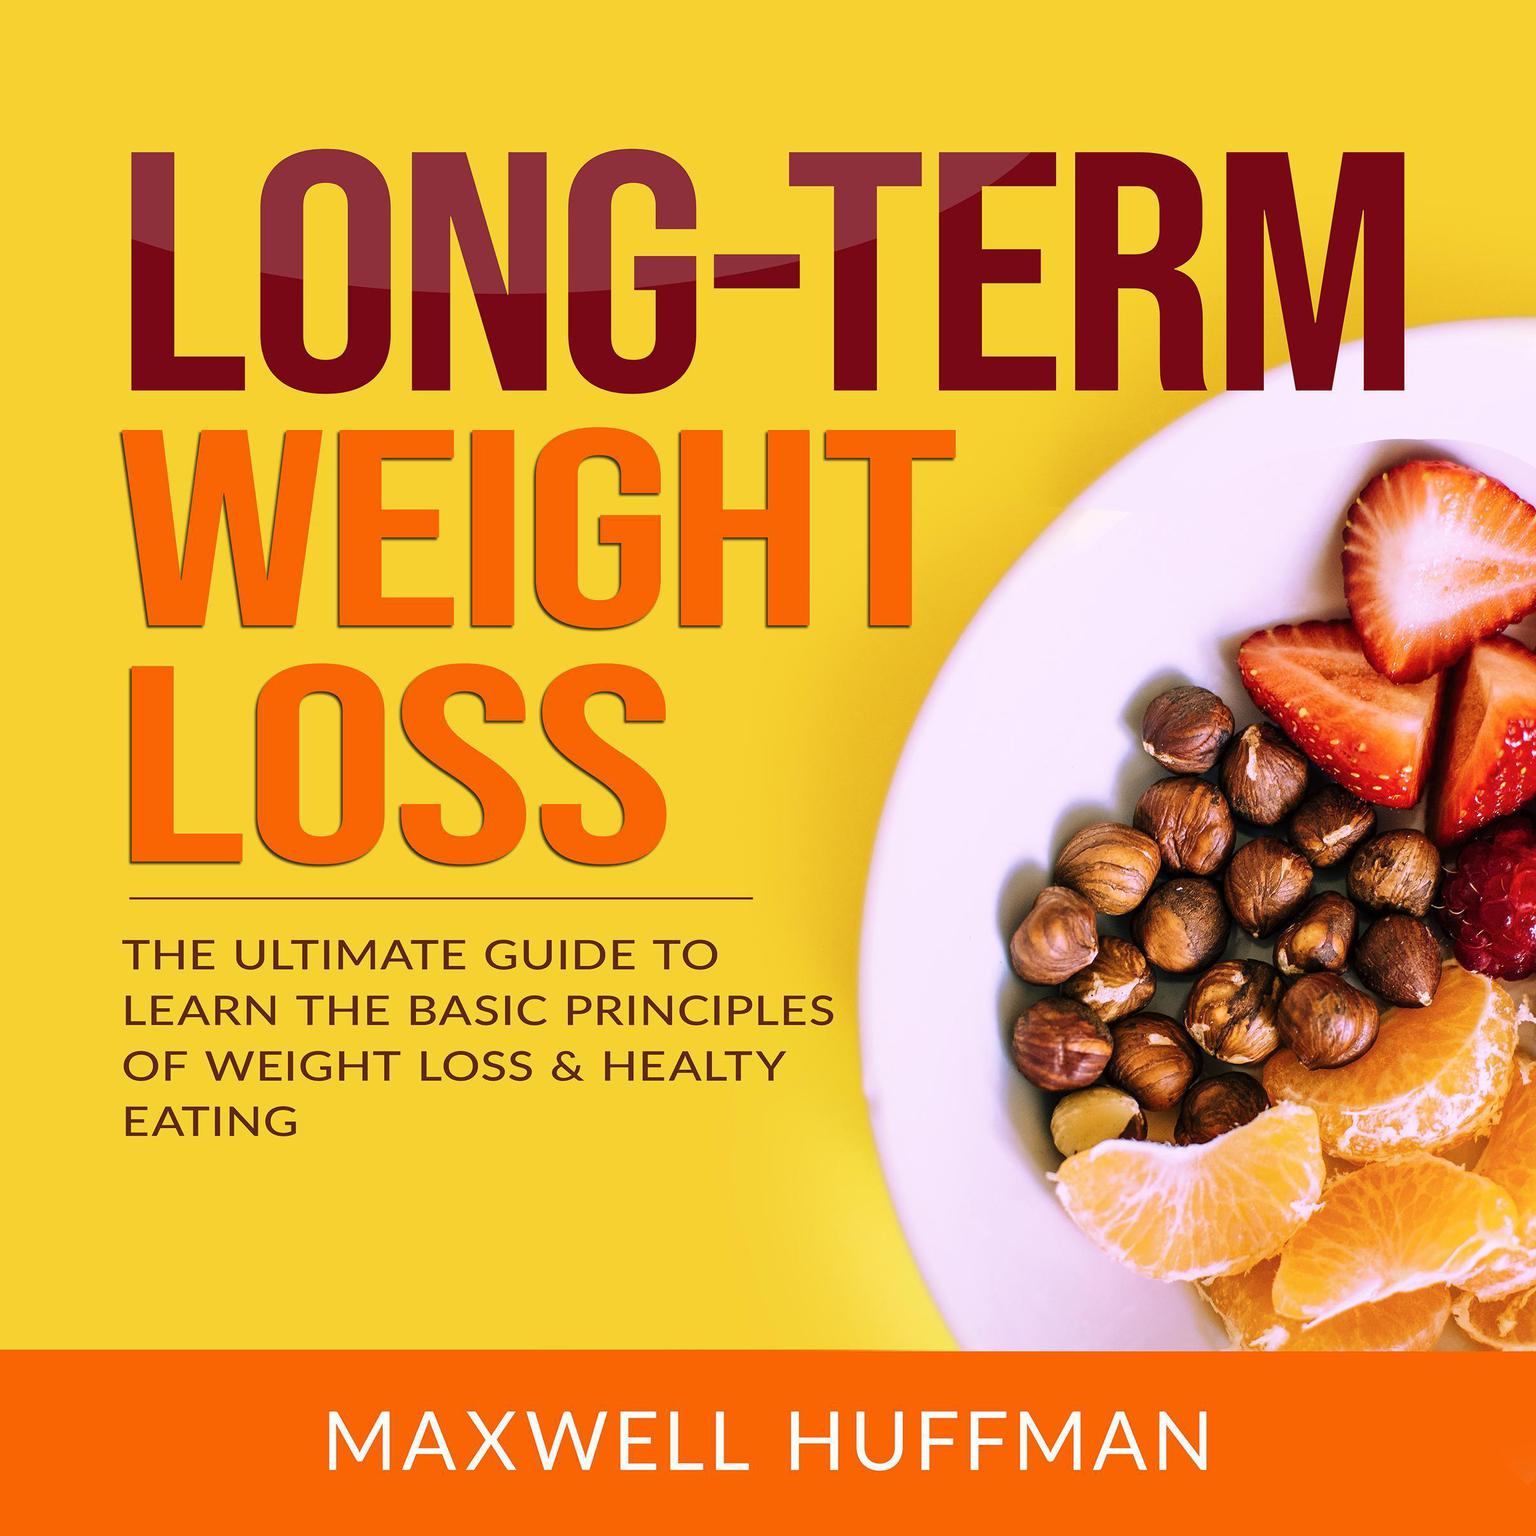 Long-Term Weight Loss: The Ultimate Guide to Learn the Basic Principles of Weight Loss & Healthy Eating Audiobook, by Maxwell Huffman